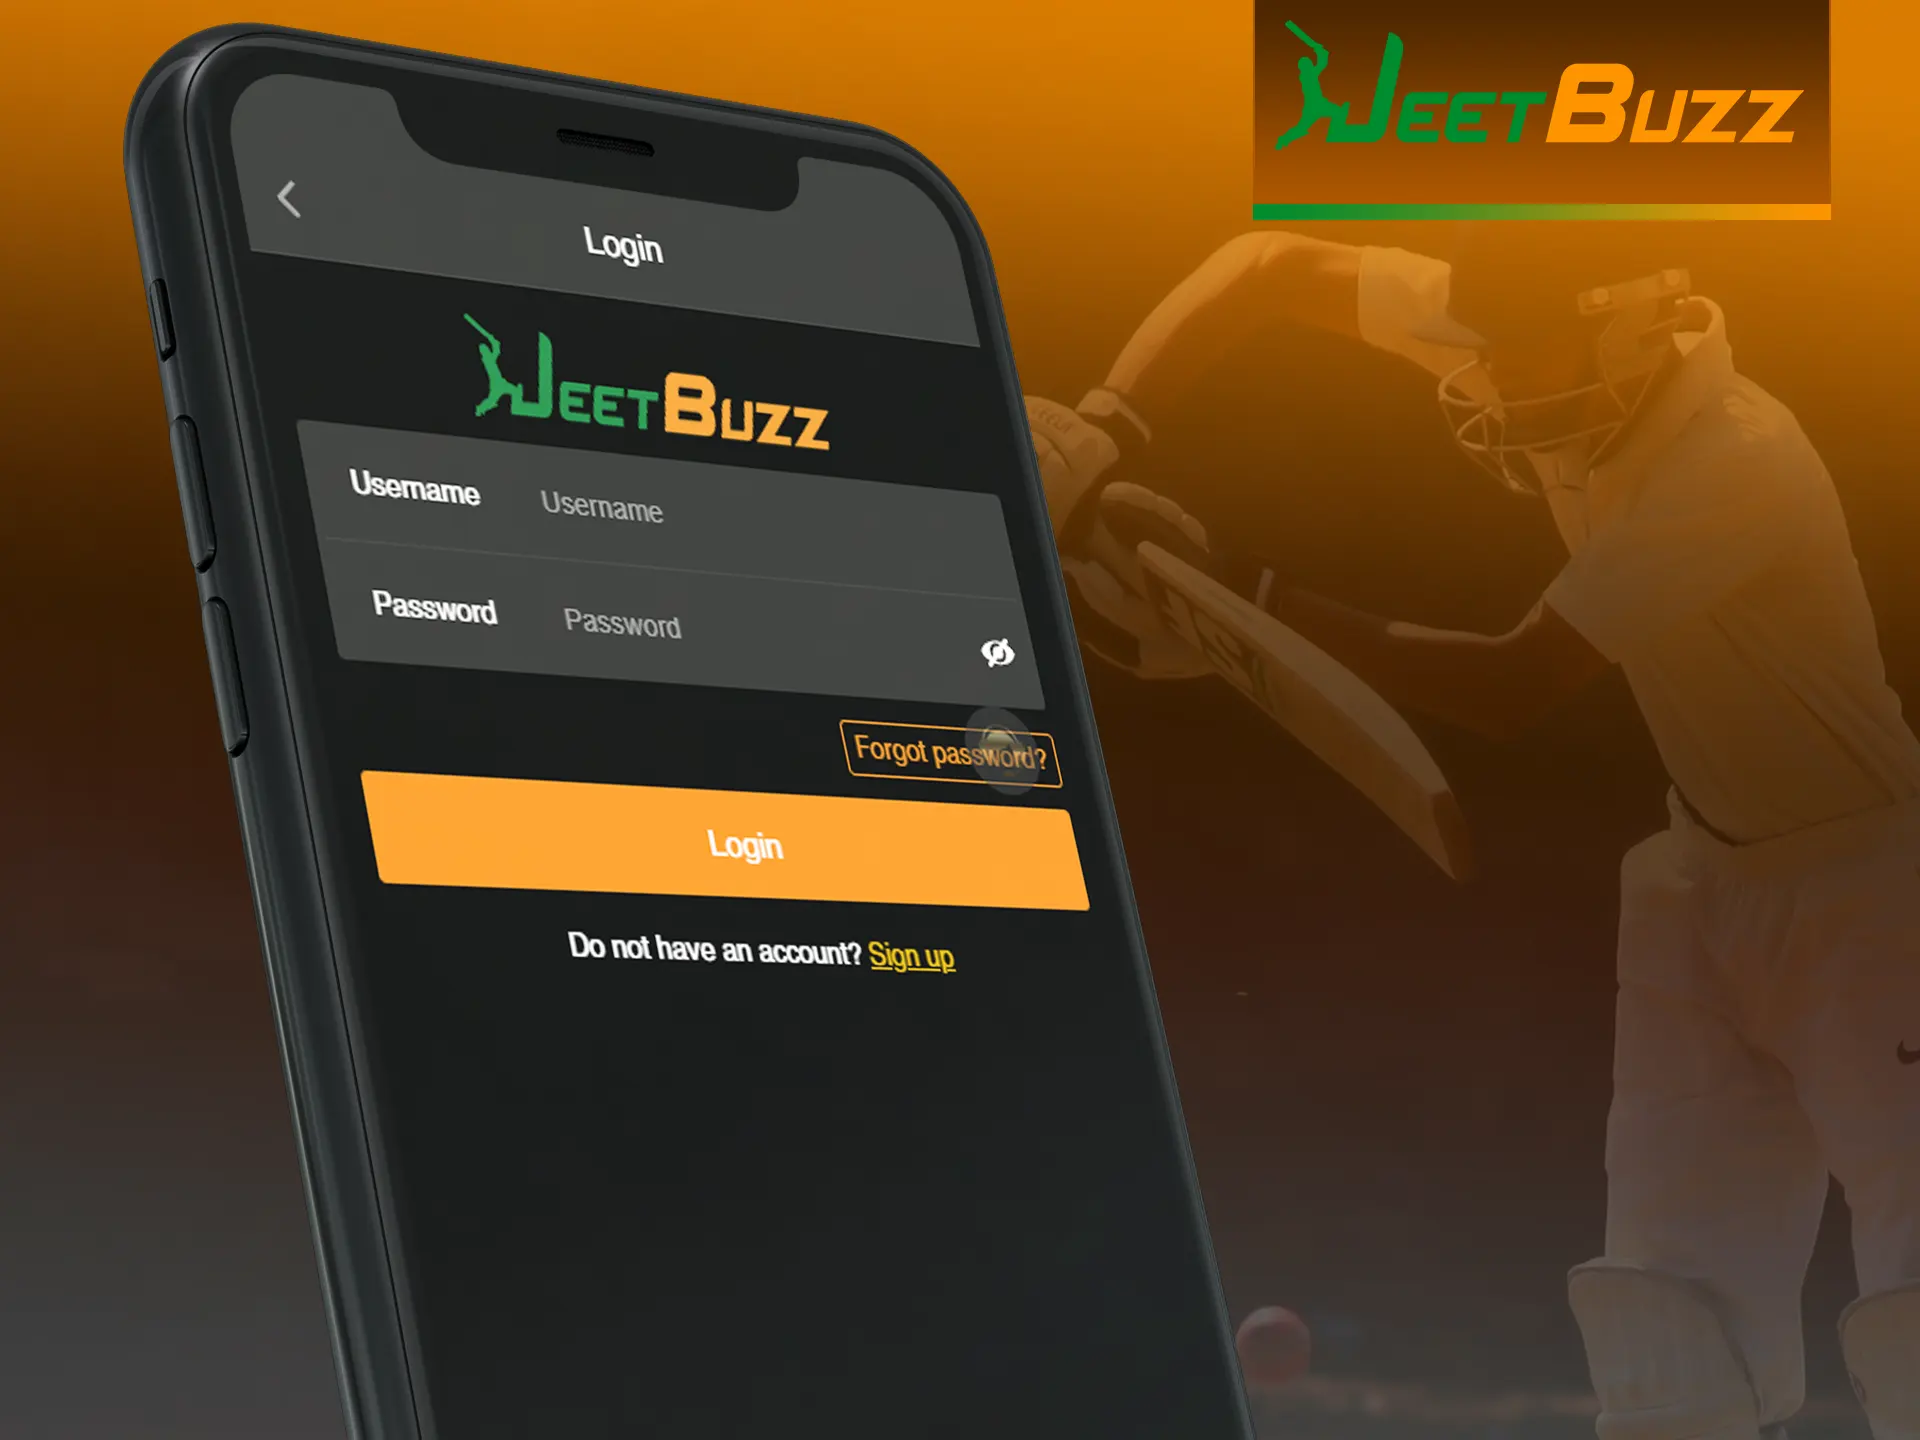 Log in to your account on the Jeetbuzz app.